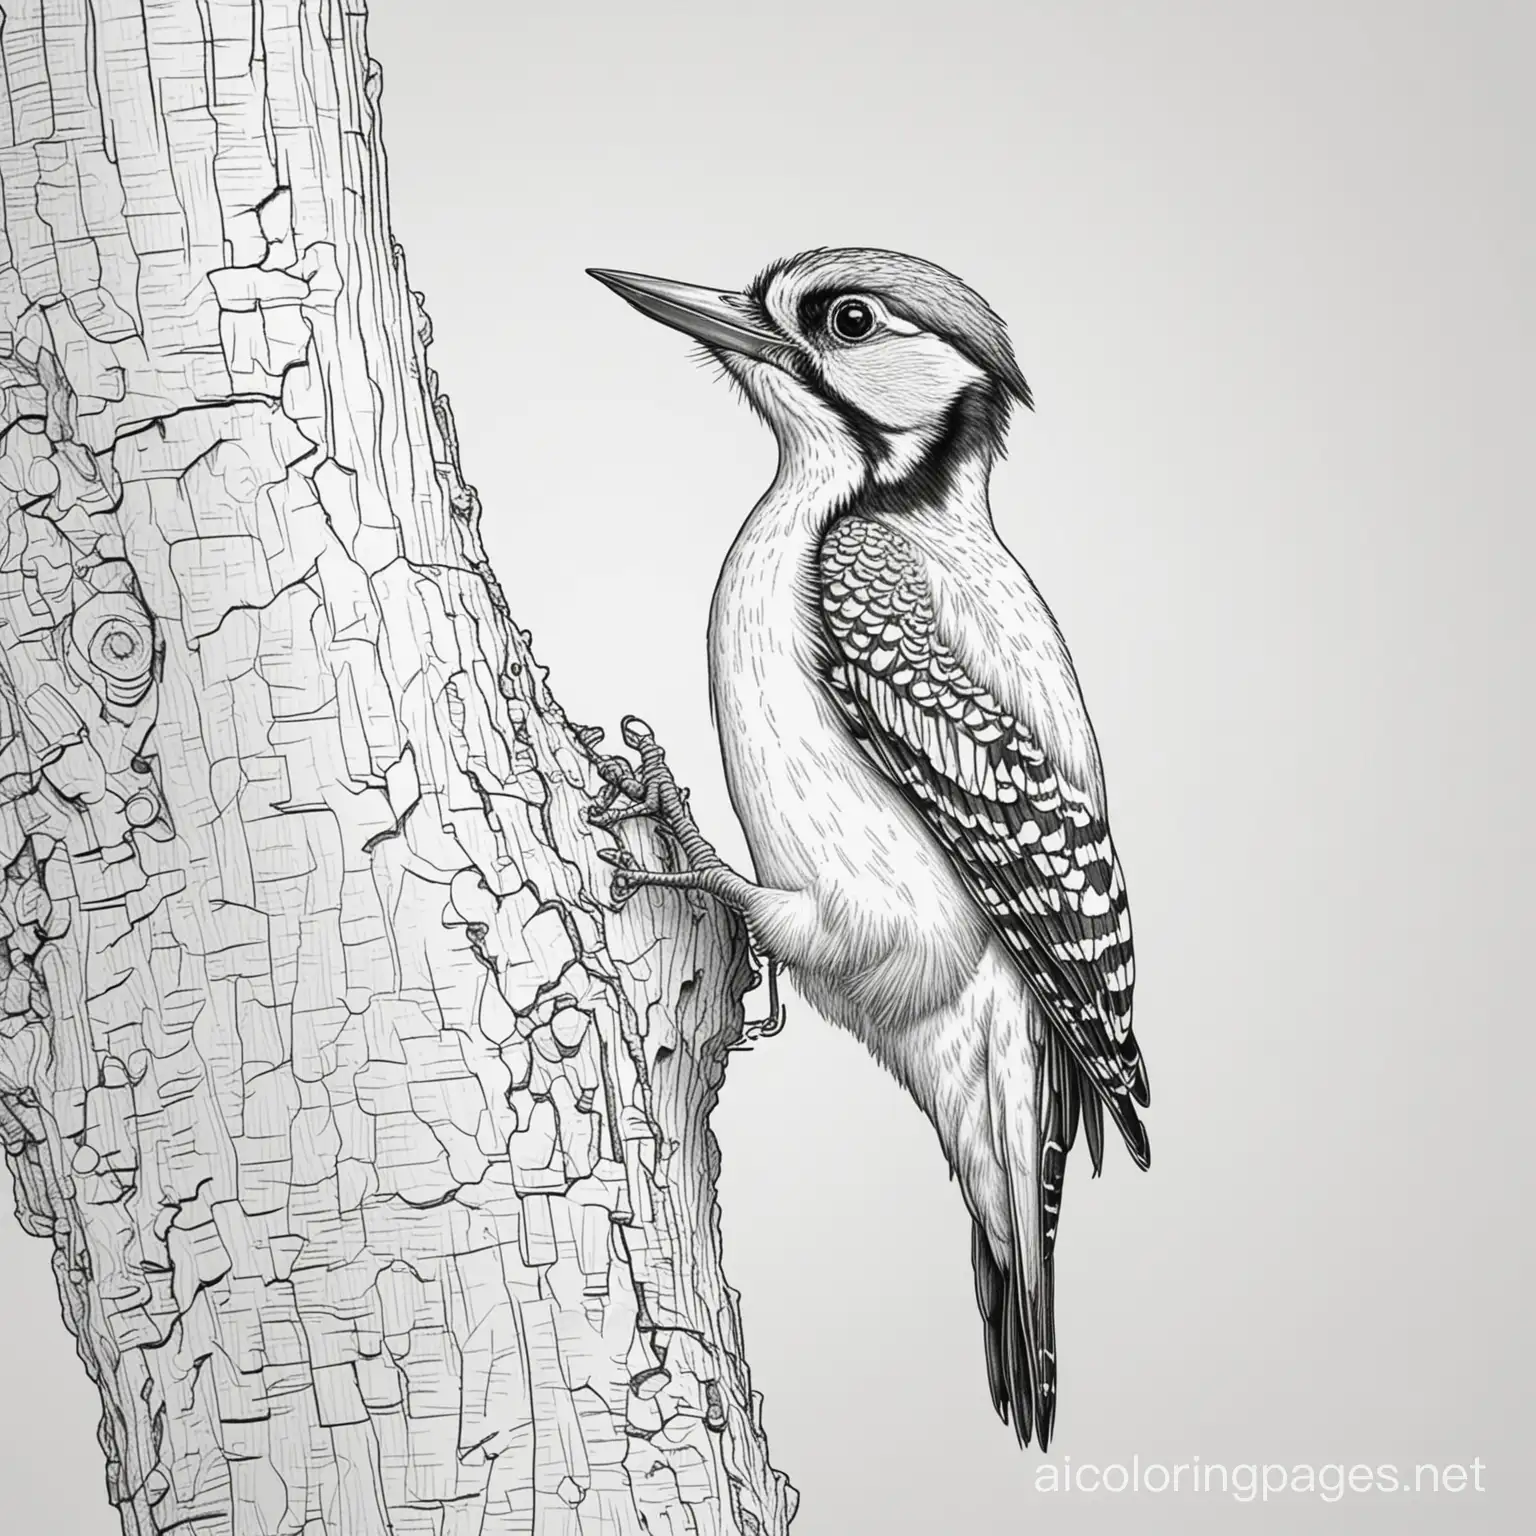 woodpecker on tree





, Coloring Page, black and white, line art, white background, Simplicity, Ample White Space. The background of the coloring page is plain white to make it easy for young children to color within the lines. The outlines of all the subjects are easy to distinguish, making it simple for kids to color without too much difficulty